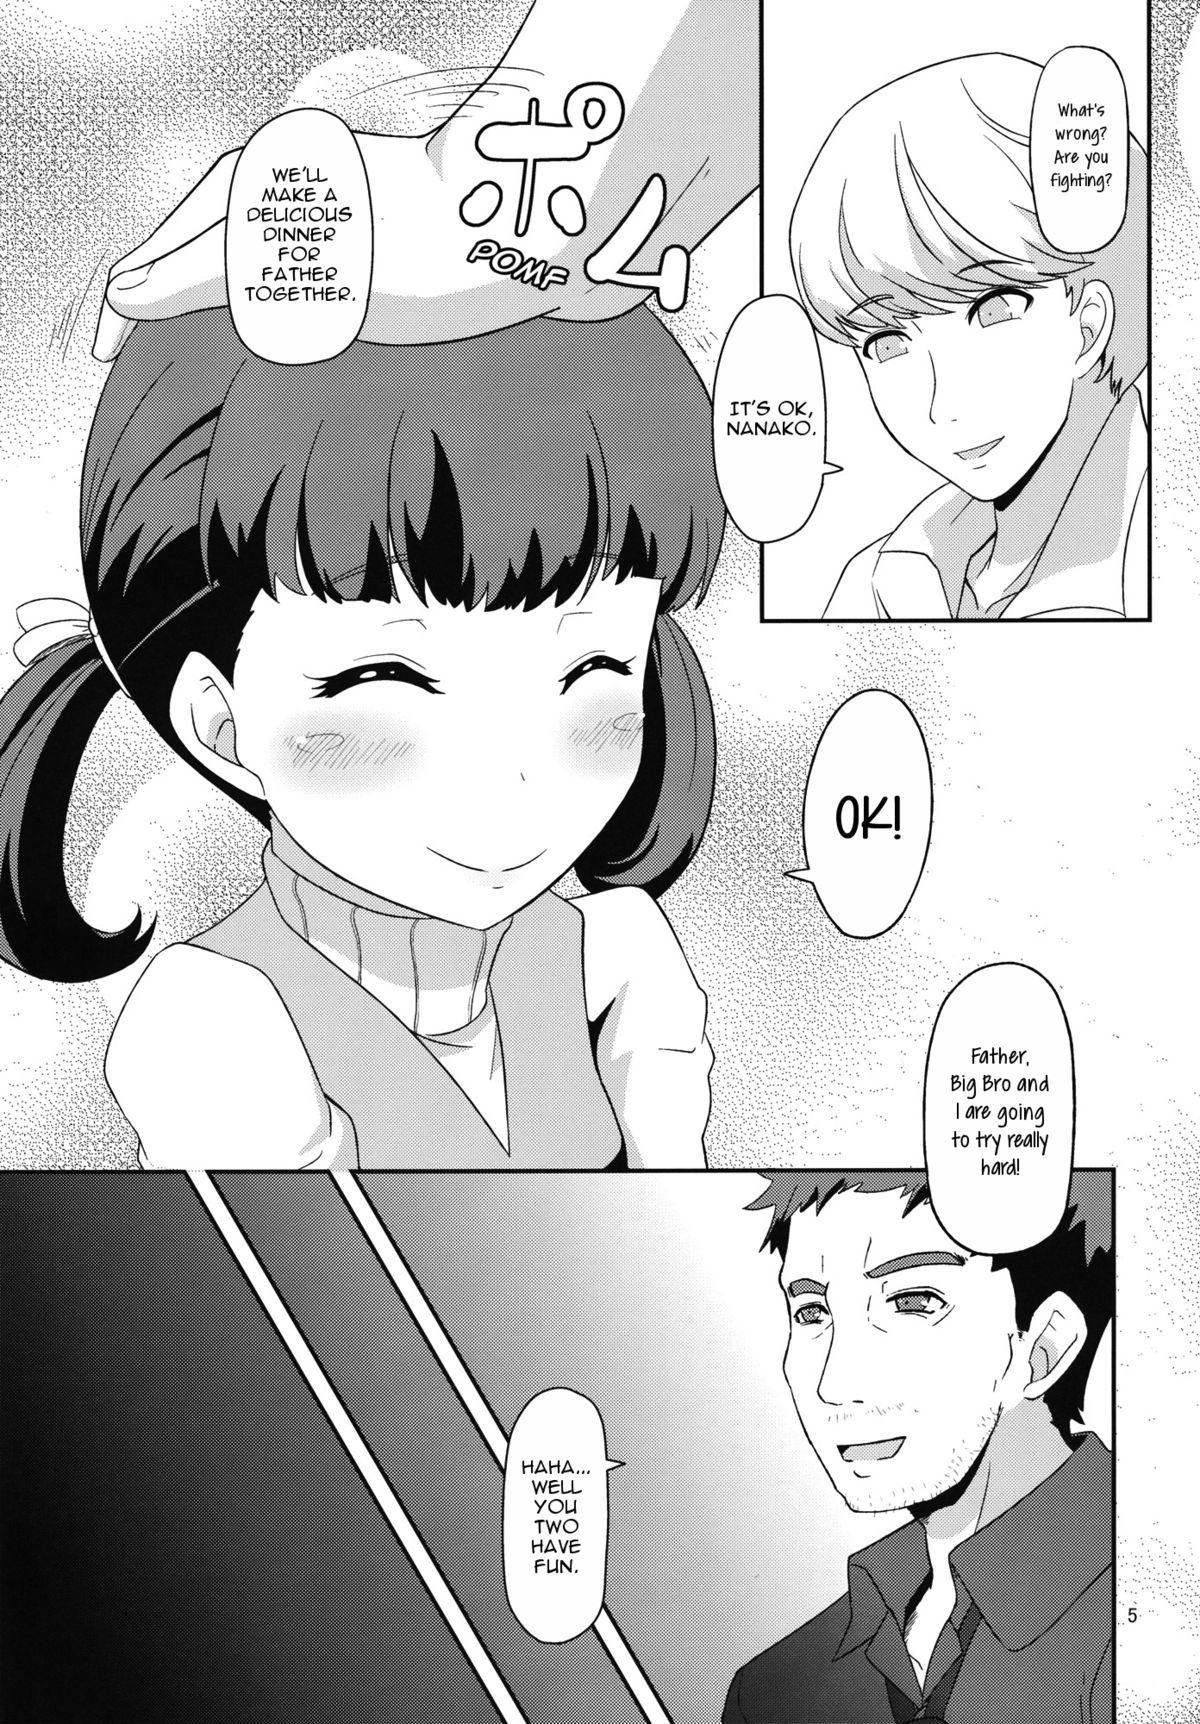 Caught Oyomesan no Narikata | How to Become a Wife - Persona 4 Tugging - Page 4